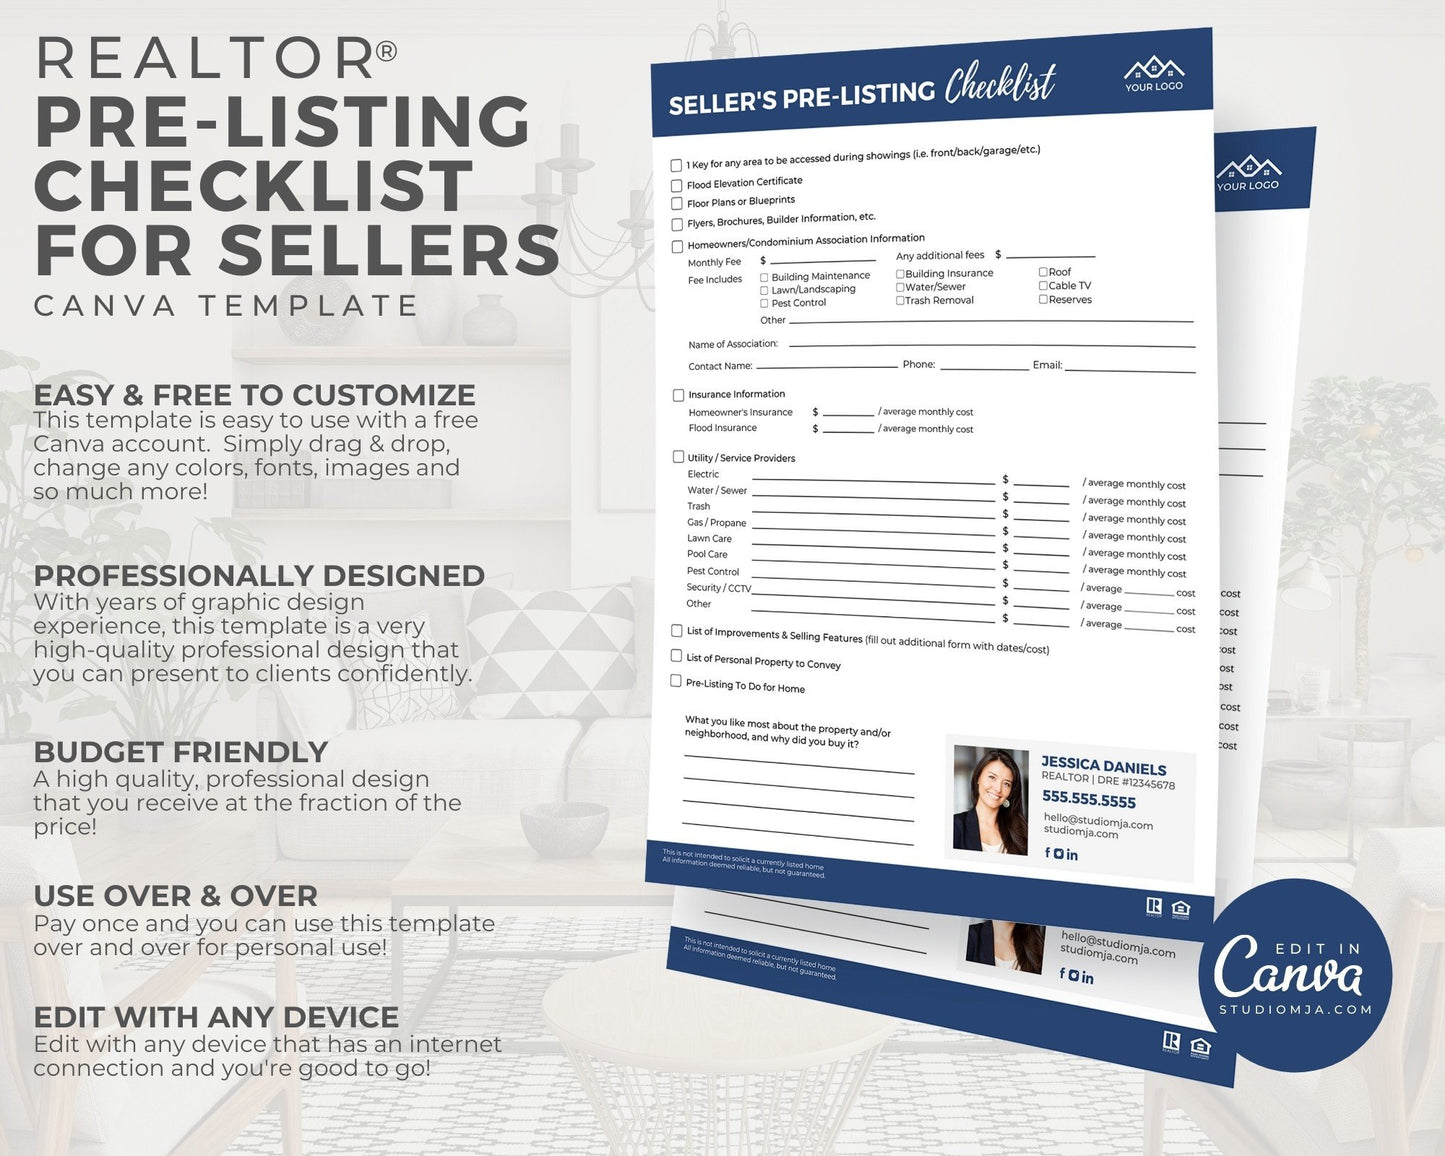 Pre-listing Checklist for Home Sellers Real Estate Home Selling